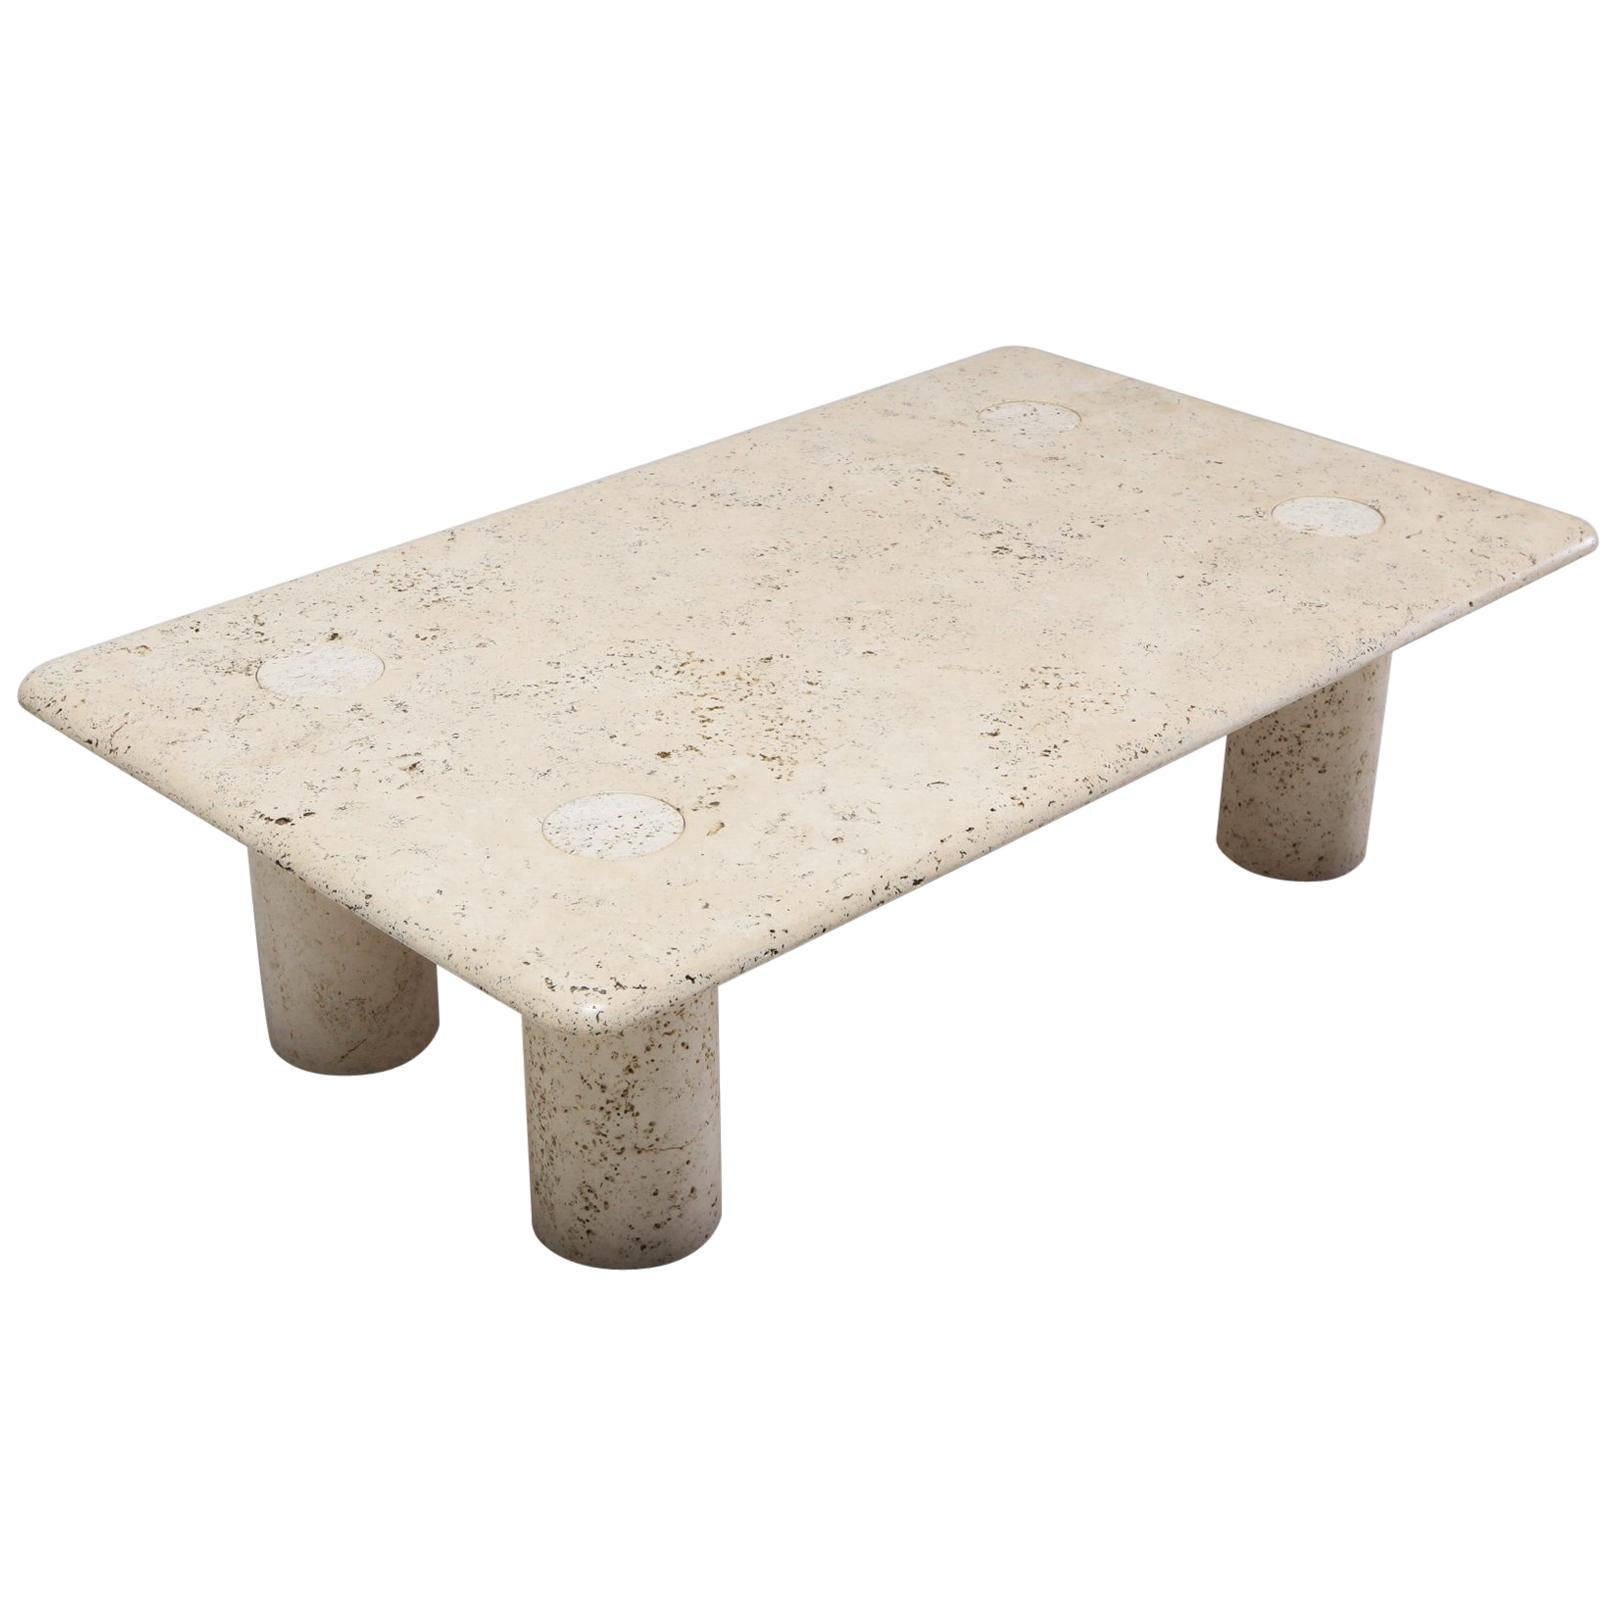 Angelo Mangiarotti Travertine Coffee Table for Up & Up